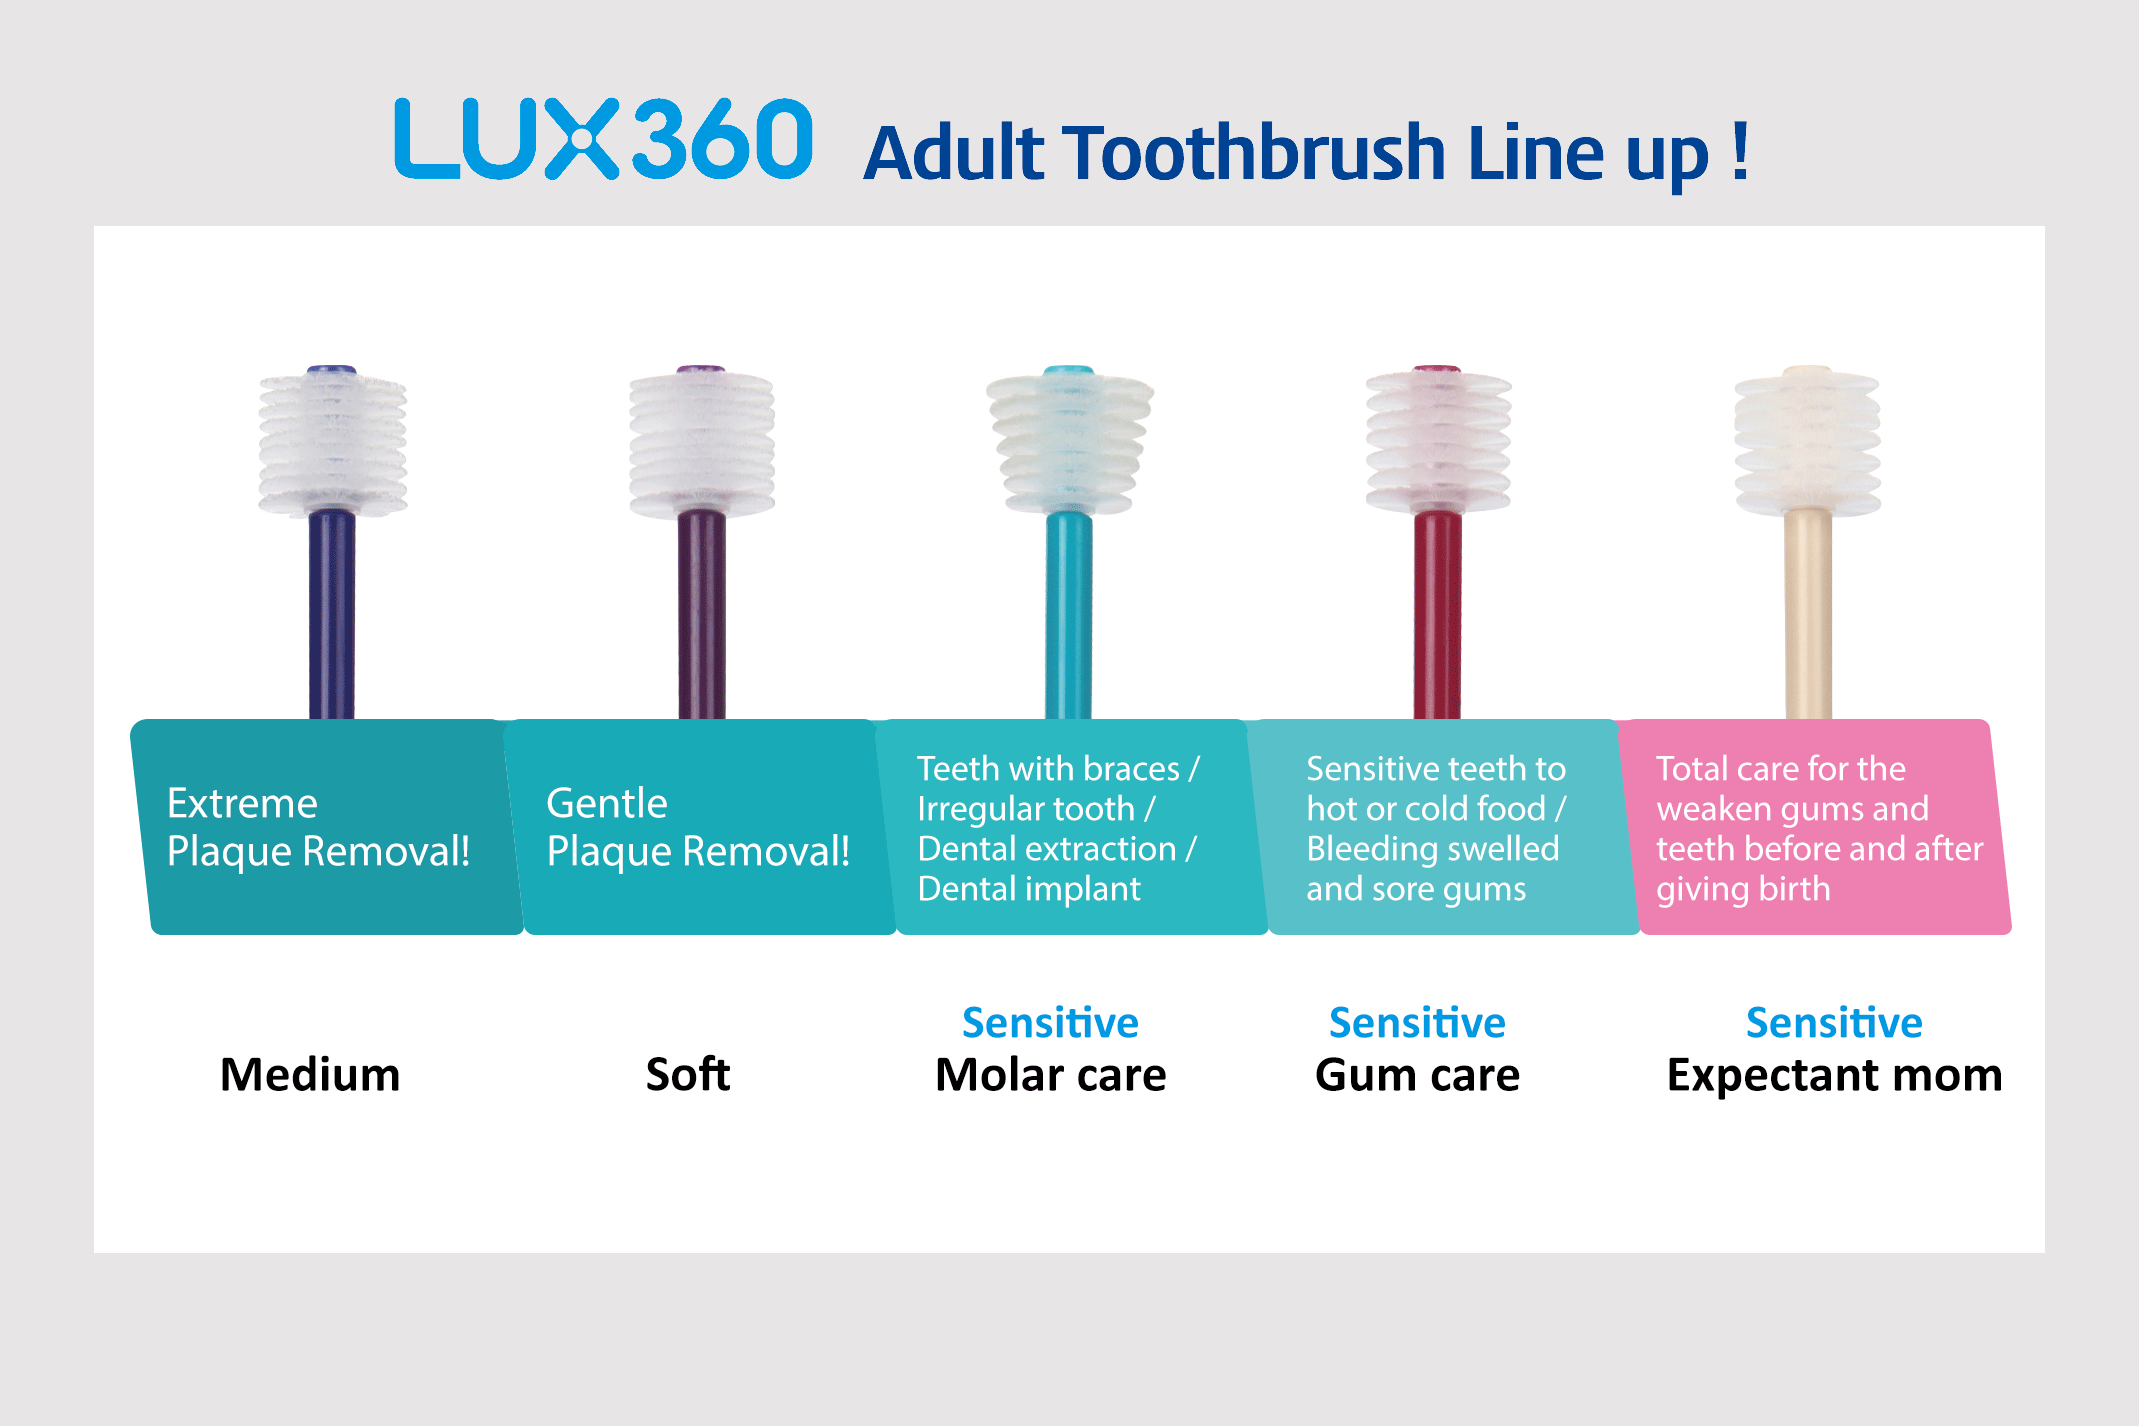 LUX360 Toothbrush line up for Adult